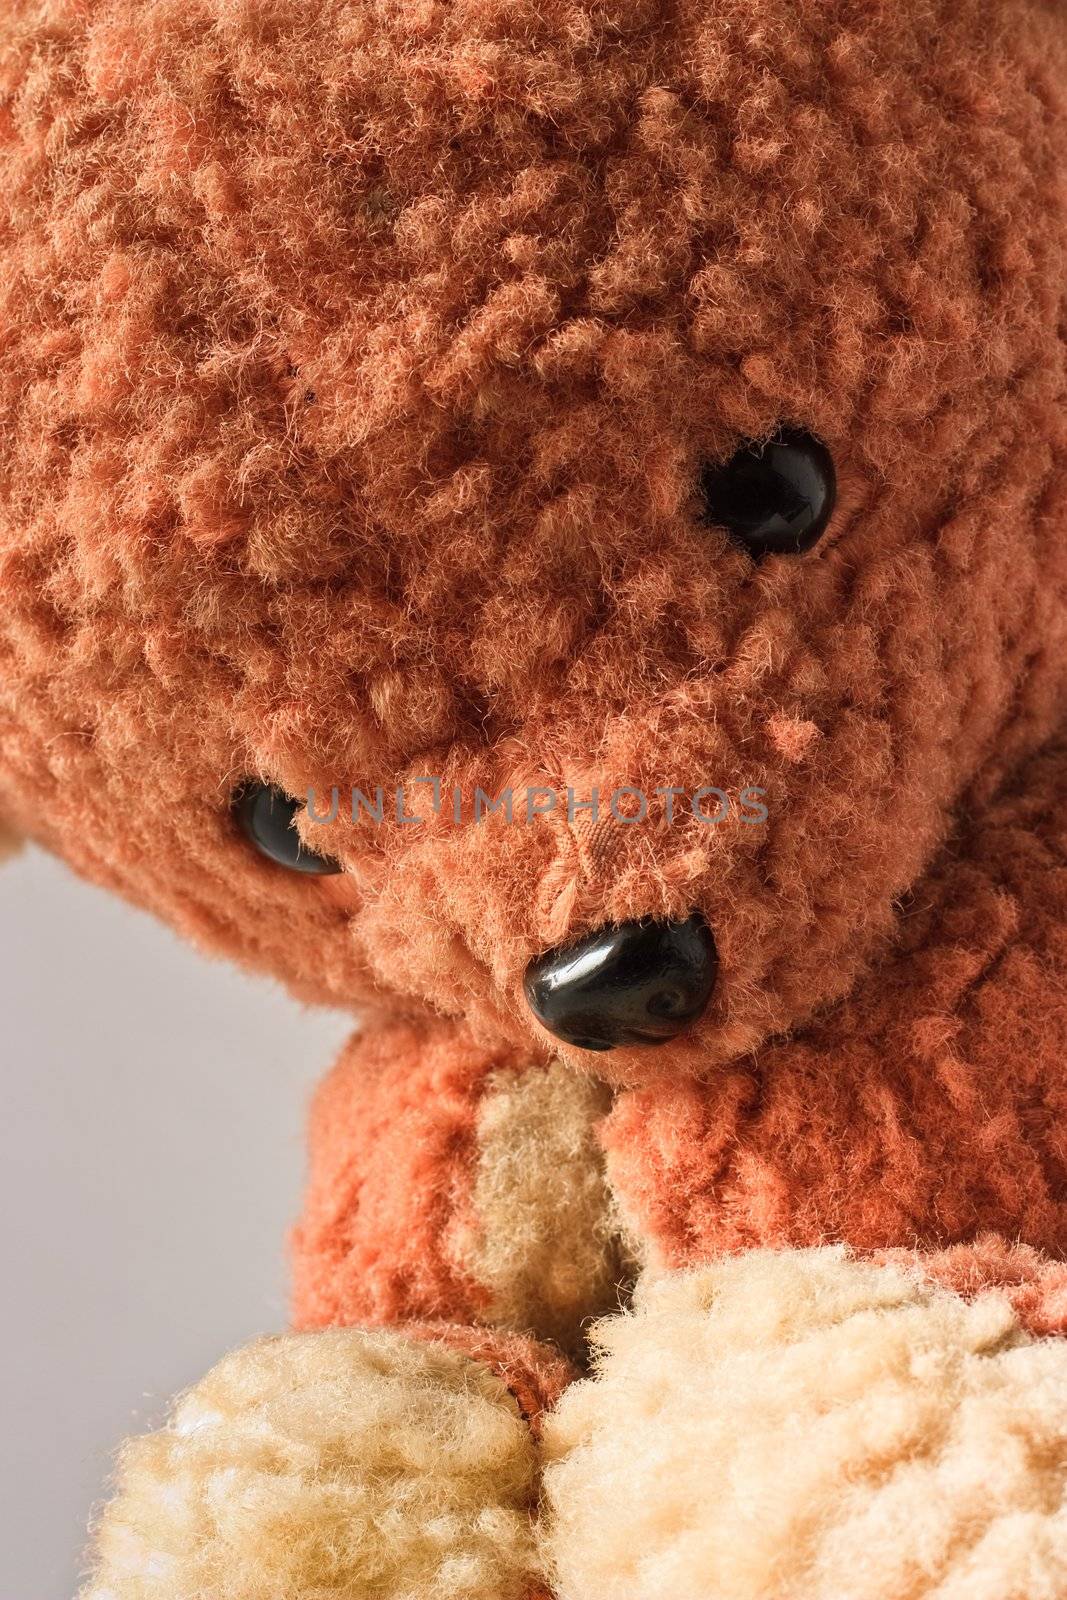 Sad brown teddy bear sitting and looking down